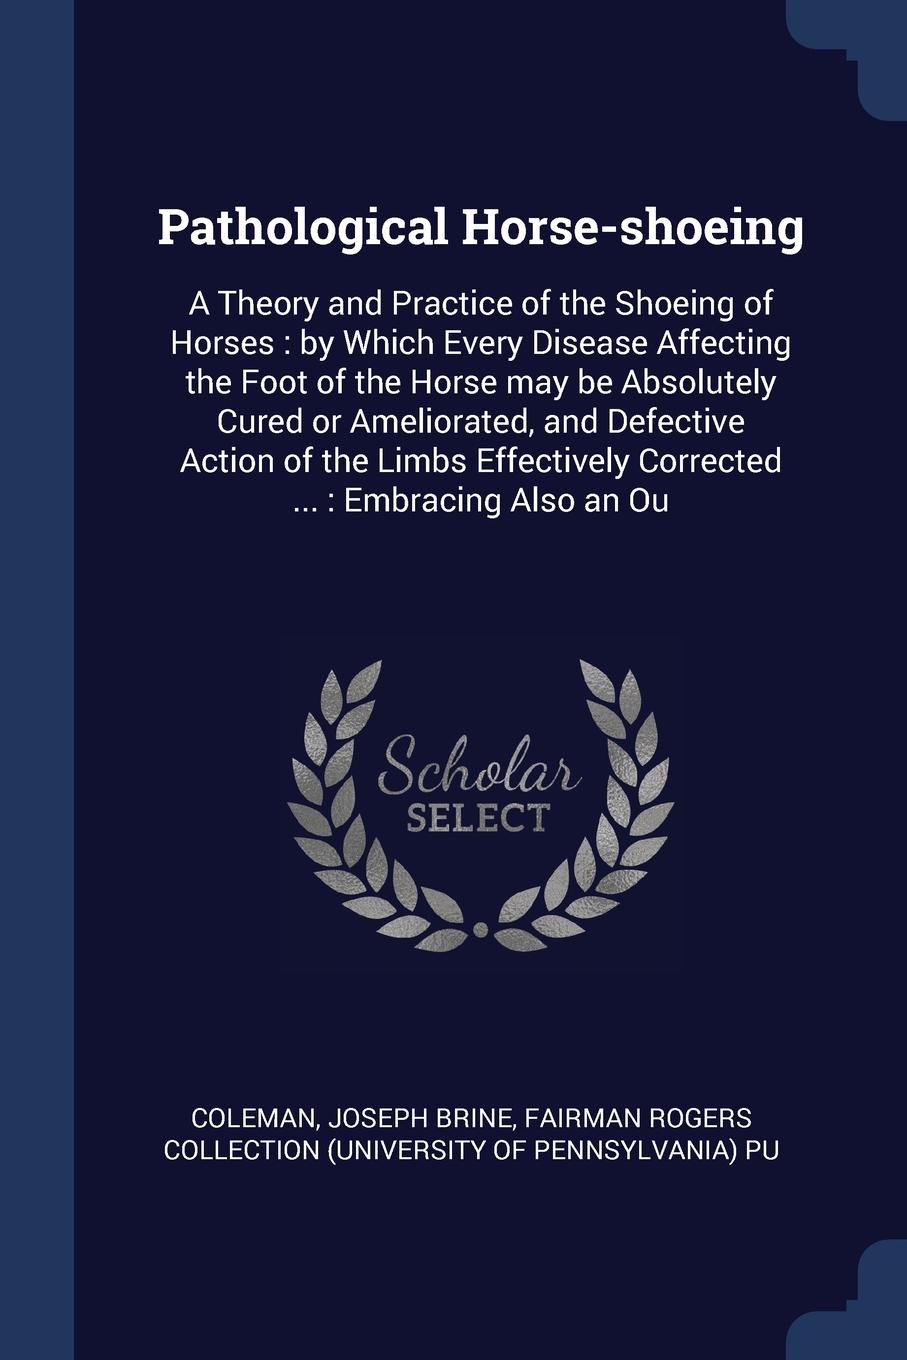 Pathological Horse-shoeing. A Theory and Practice of the Shoeing of Horses : by Which Every Disease Affecting the Foot of the Horse may be Absolutely Cured or Ameliorated, and Defective Action of the Limbs Effectively Corrected ... : Embracing Als...